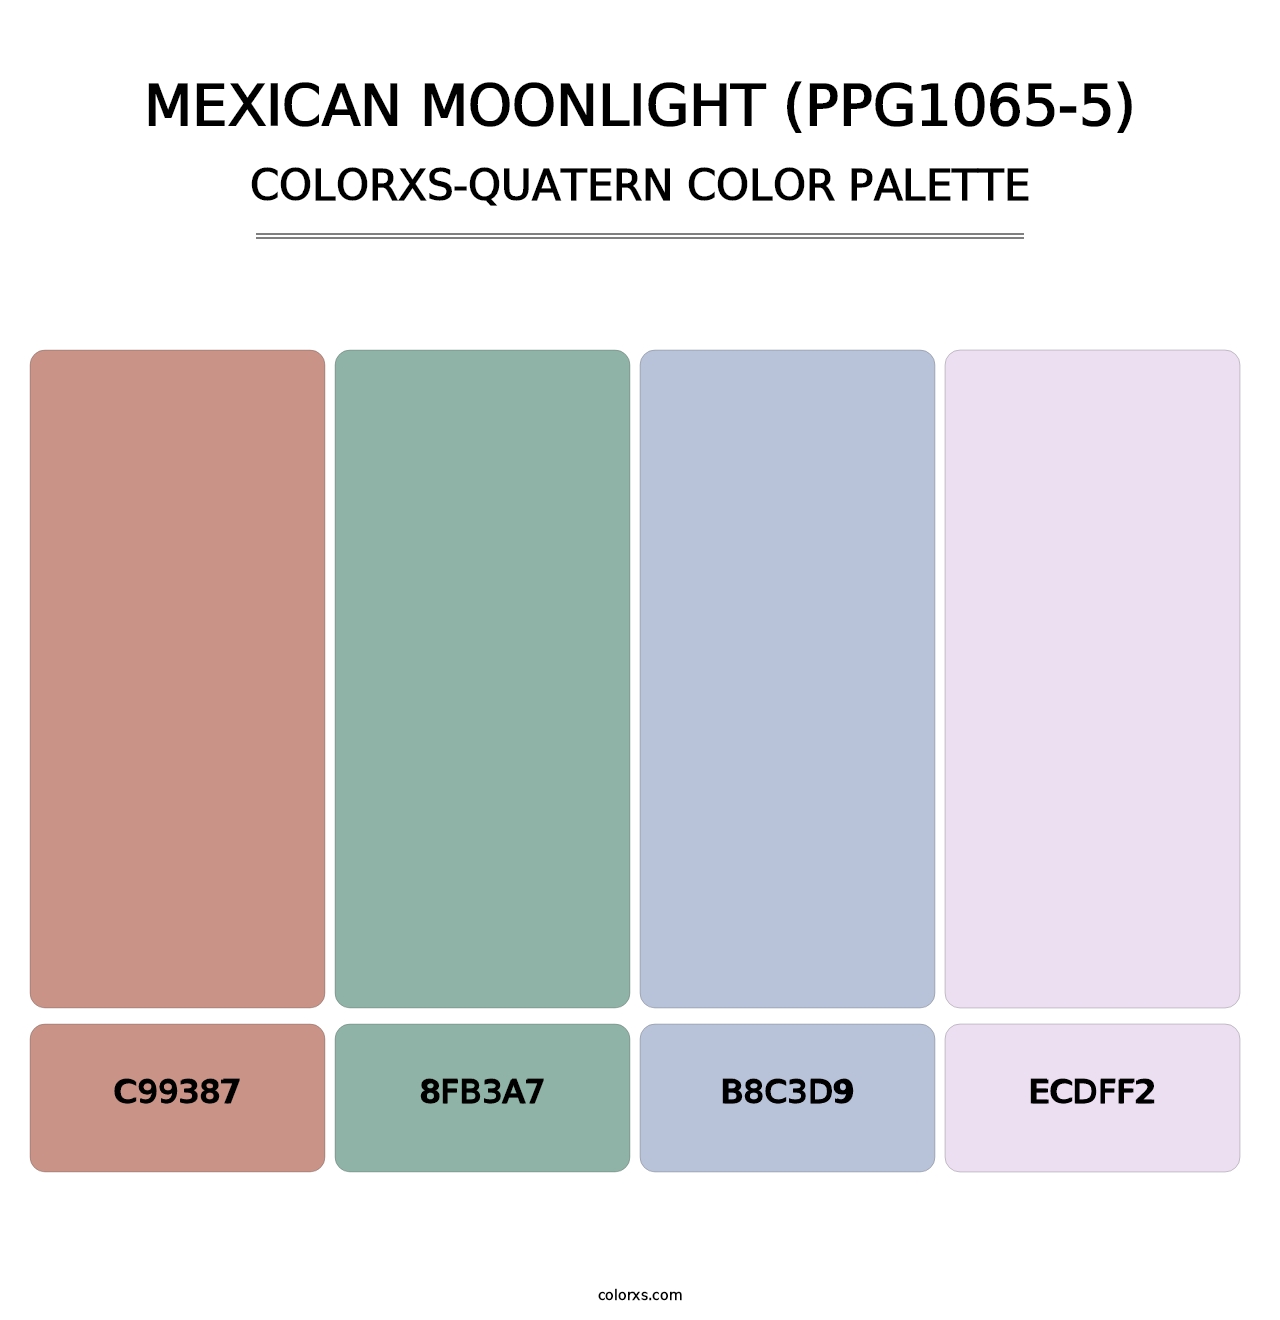 Mexican Moonlight (PPG1065-5) - Colorxs Quatern Palette